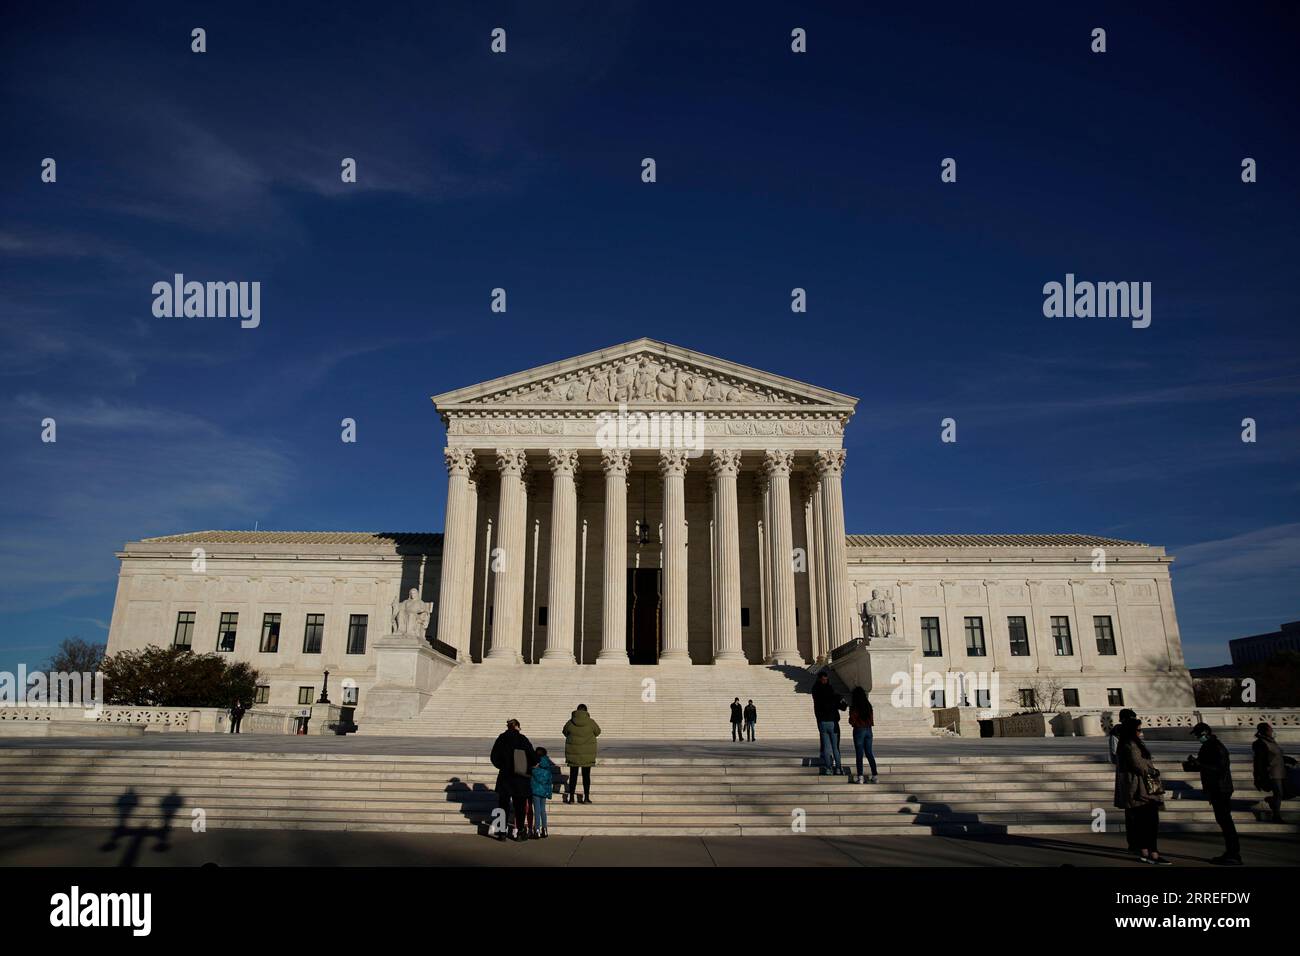 220226 -- WASHINGTON, Feb. 26, 2022 -- Photo taken on Feb. 25, 2022 shows the U.S. Supreme Court building in Washington, D.C., the United States. U.S. President Joe Biden said on Friday that he s nominating Judge Ketanji Brown Jackson for the Supreme Court, setting in motion a process for the first African American woman to sit on its bench. Photo by /Xinhua U.S.-WASHINGTON, D.C.-BIDEN-SUPREME COURT-NOMINATION TingxShen PUBLICATIONxNOTxINxCHN Stock Photo